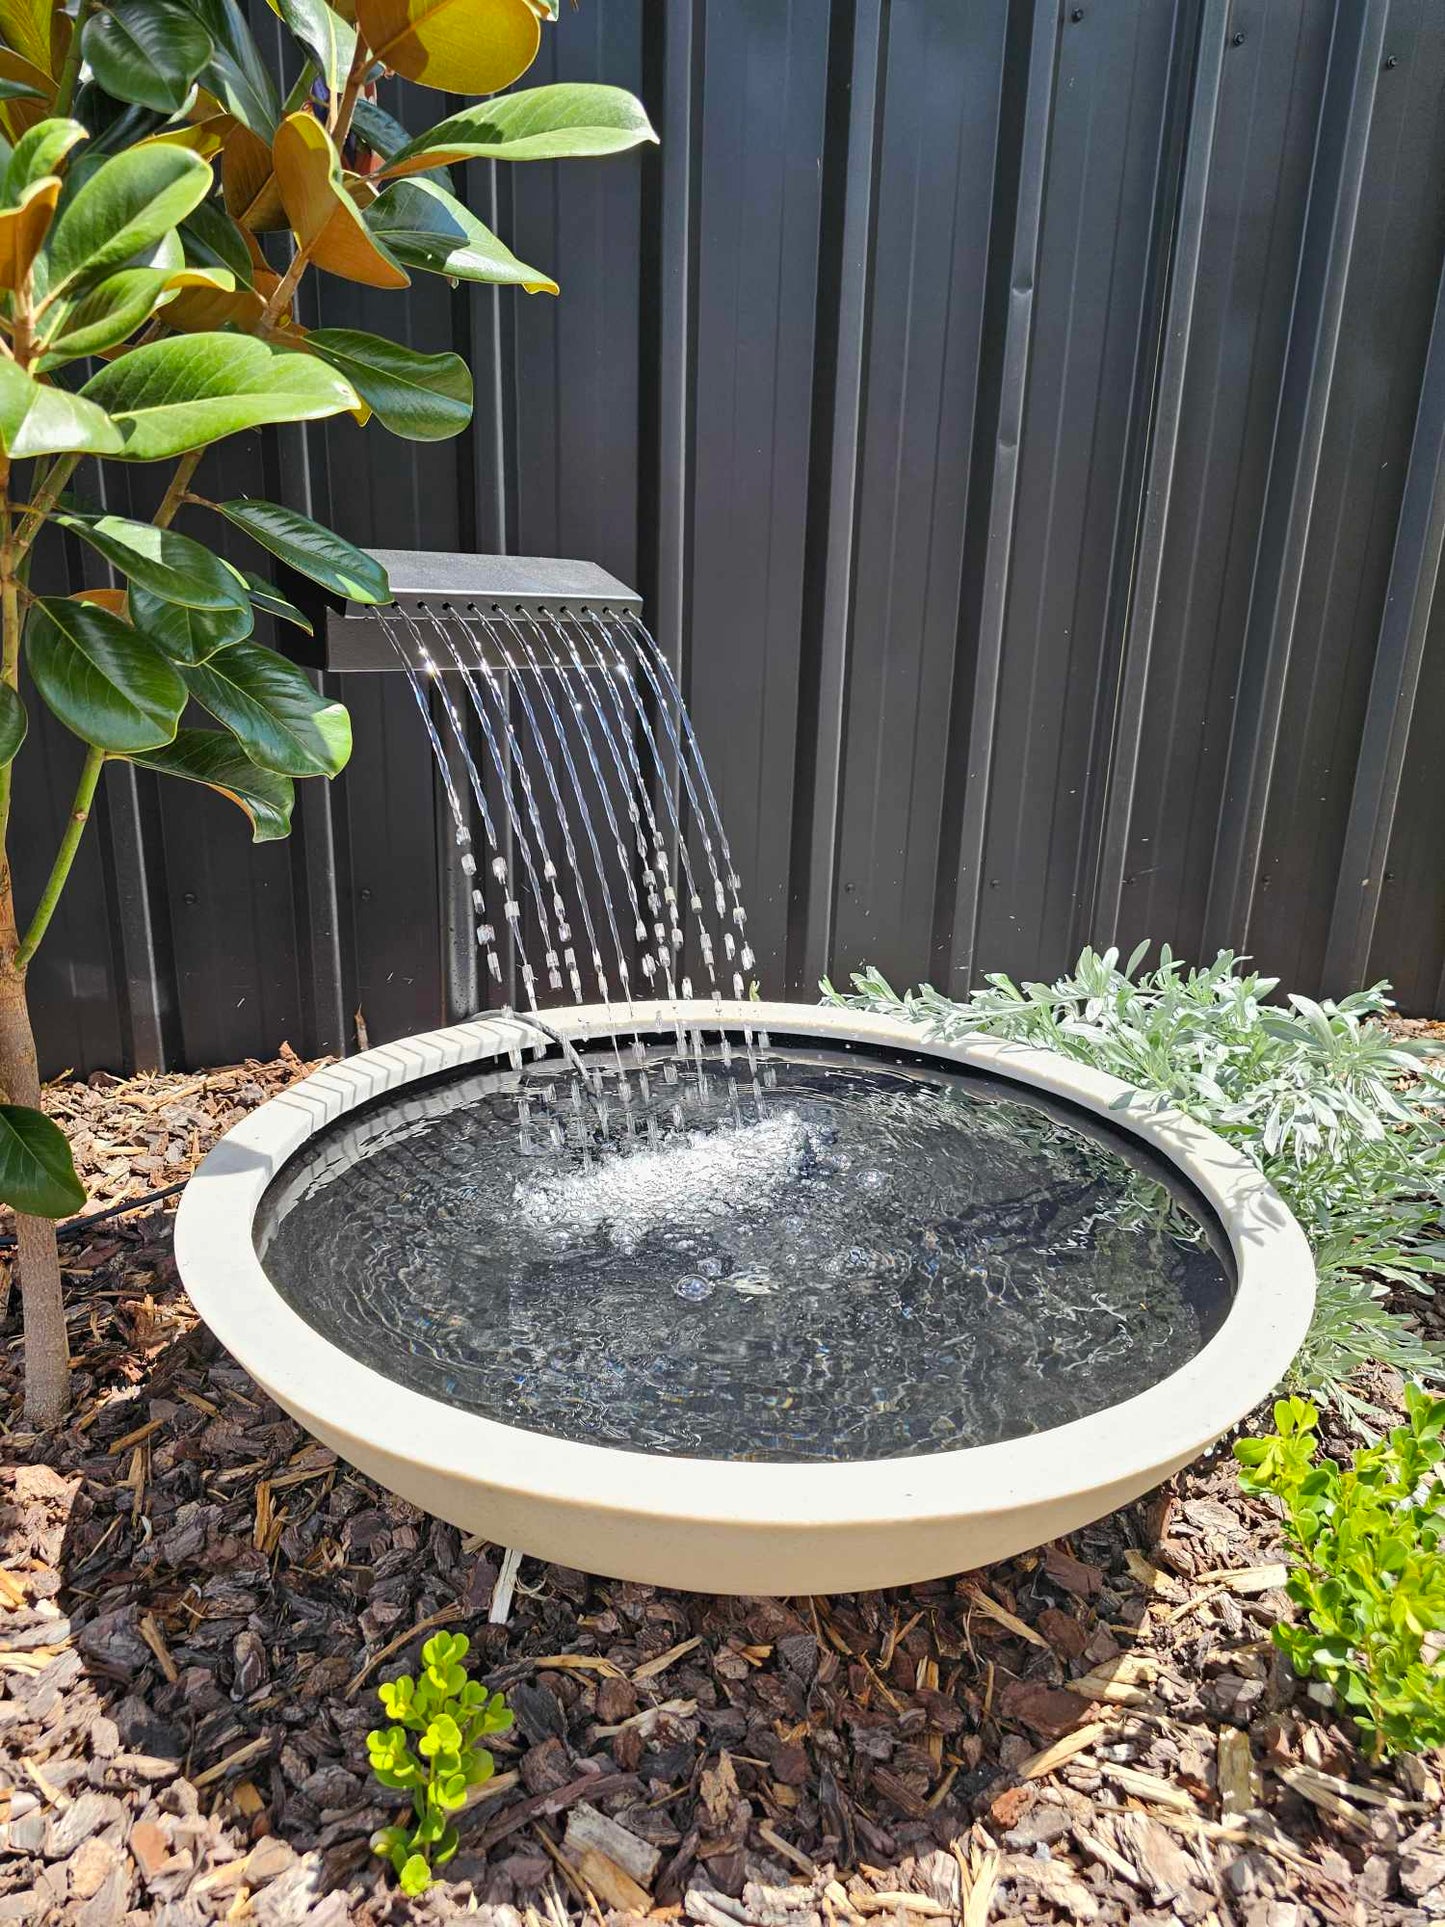 Kai "RAIN DROP" Water Feature with Urban Bowl Water Feature  